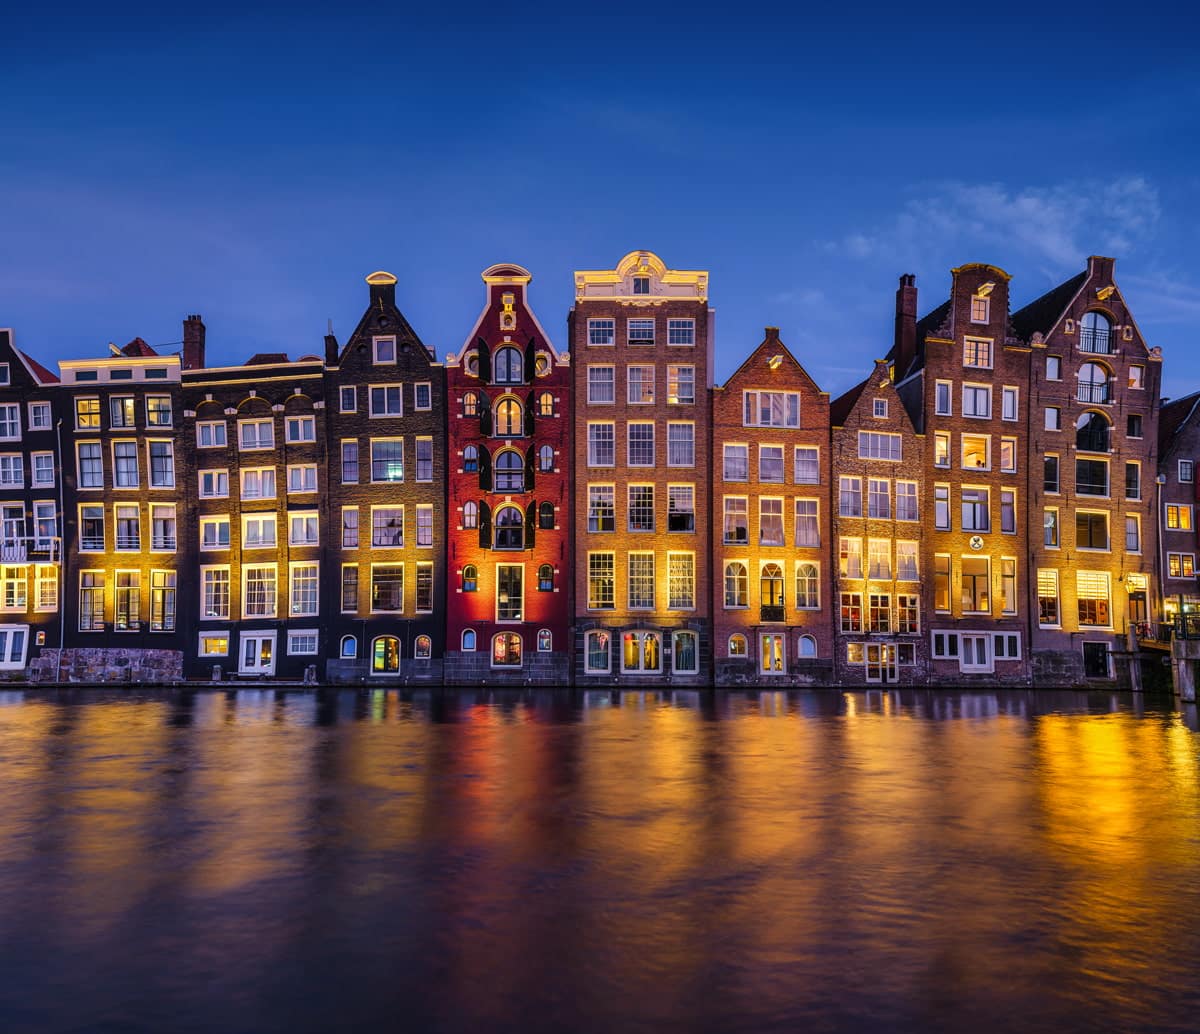 The Old Town of Amsterdam